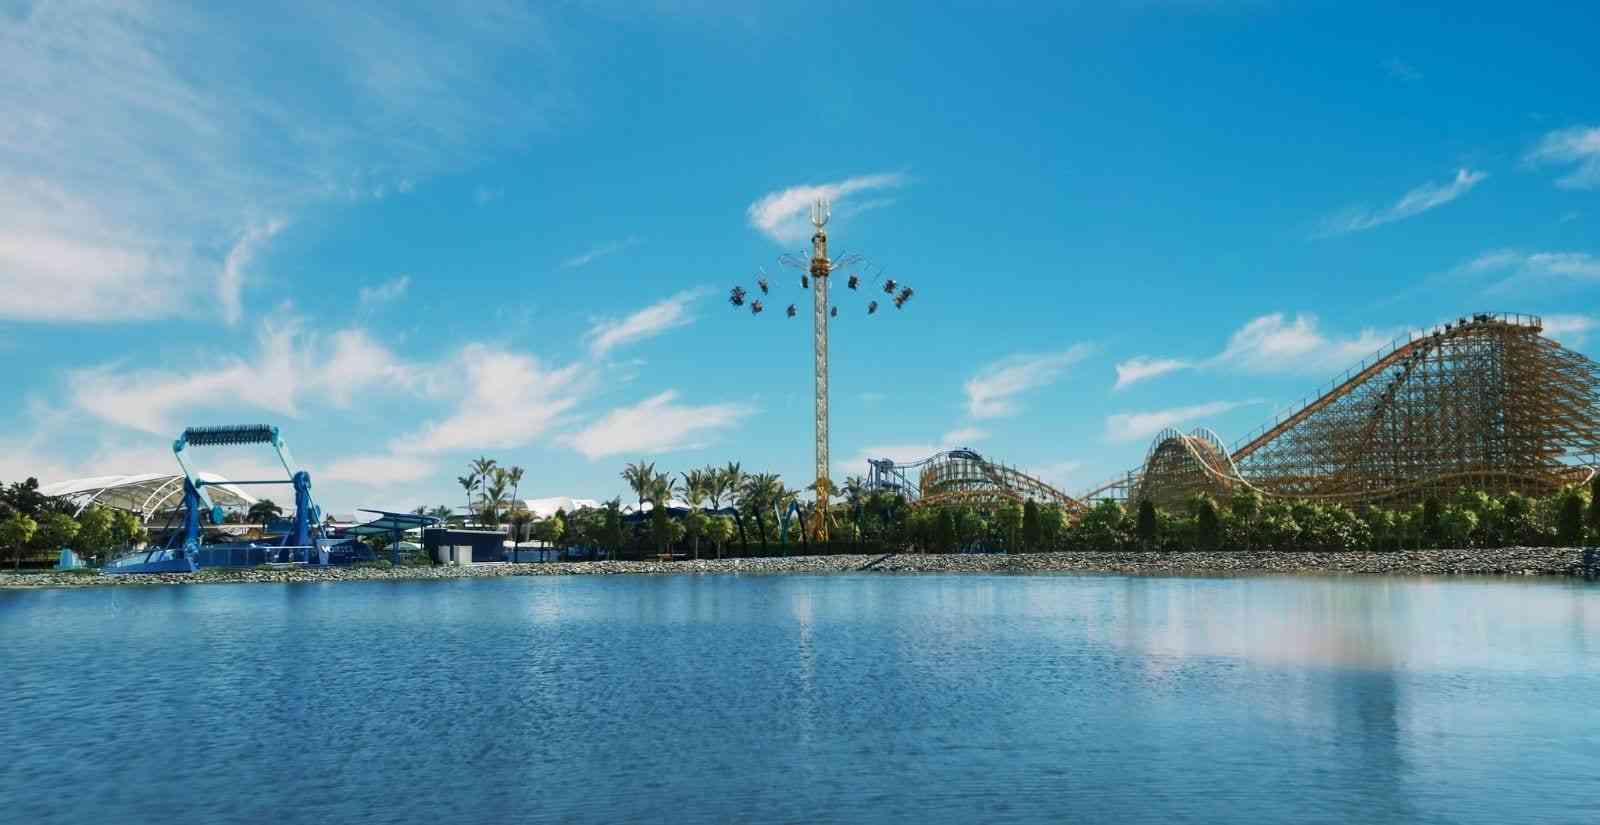 3 New Hair-Raising Rides Coming To The Gold Coast in 2021